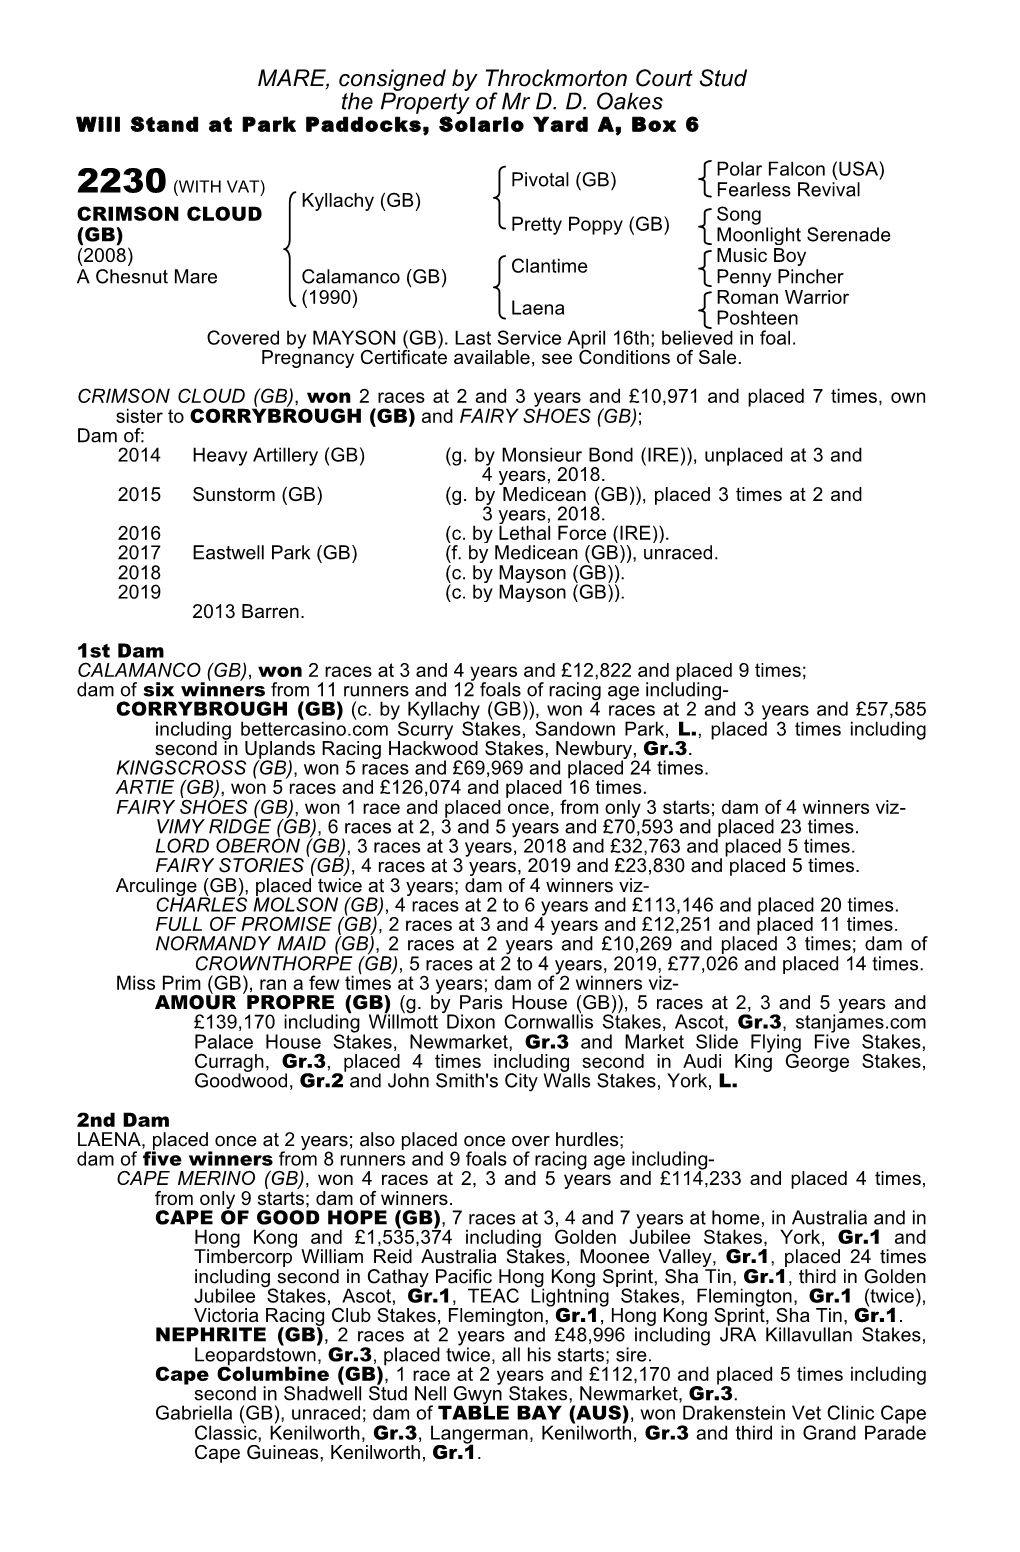 MARE, Consigned by Throckmorton Court Stud the Property of Mr D. D. Oakes Will Stand at Park Paddocks, Solario Yard A, Box 6